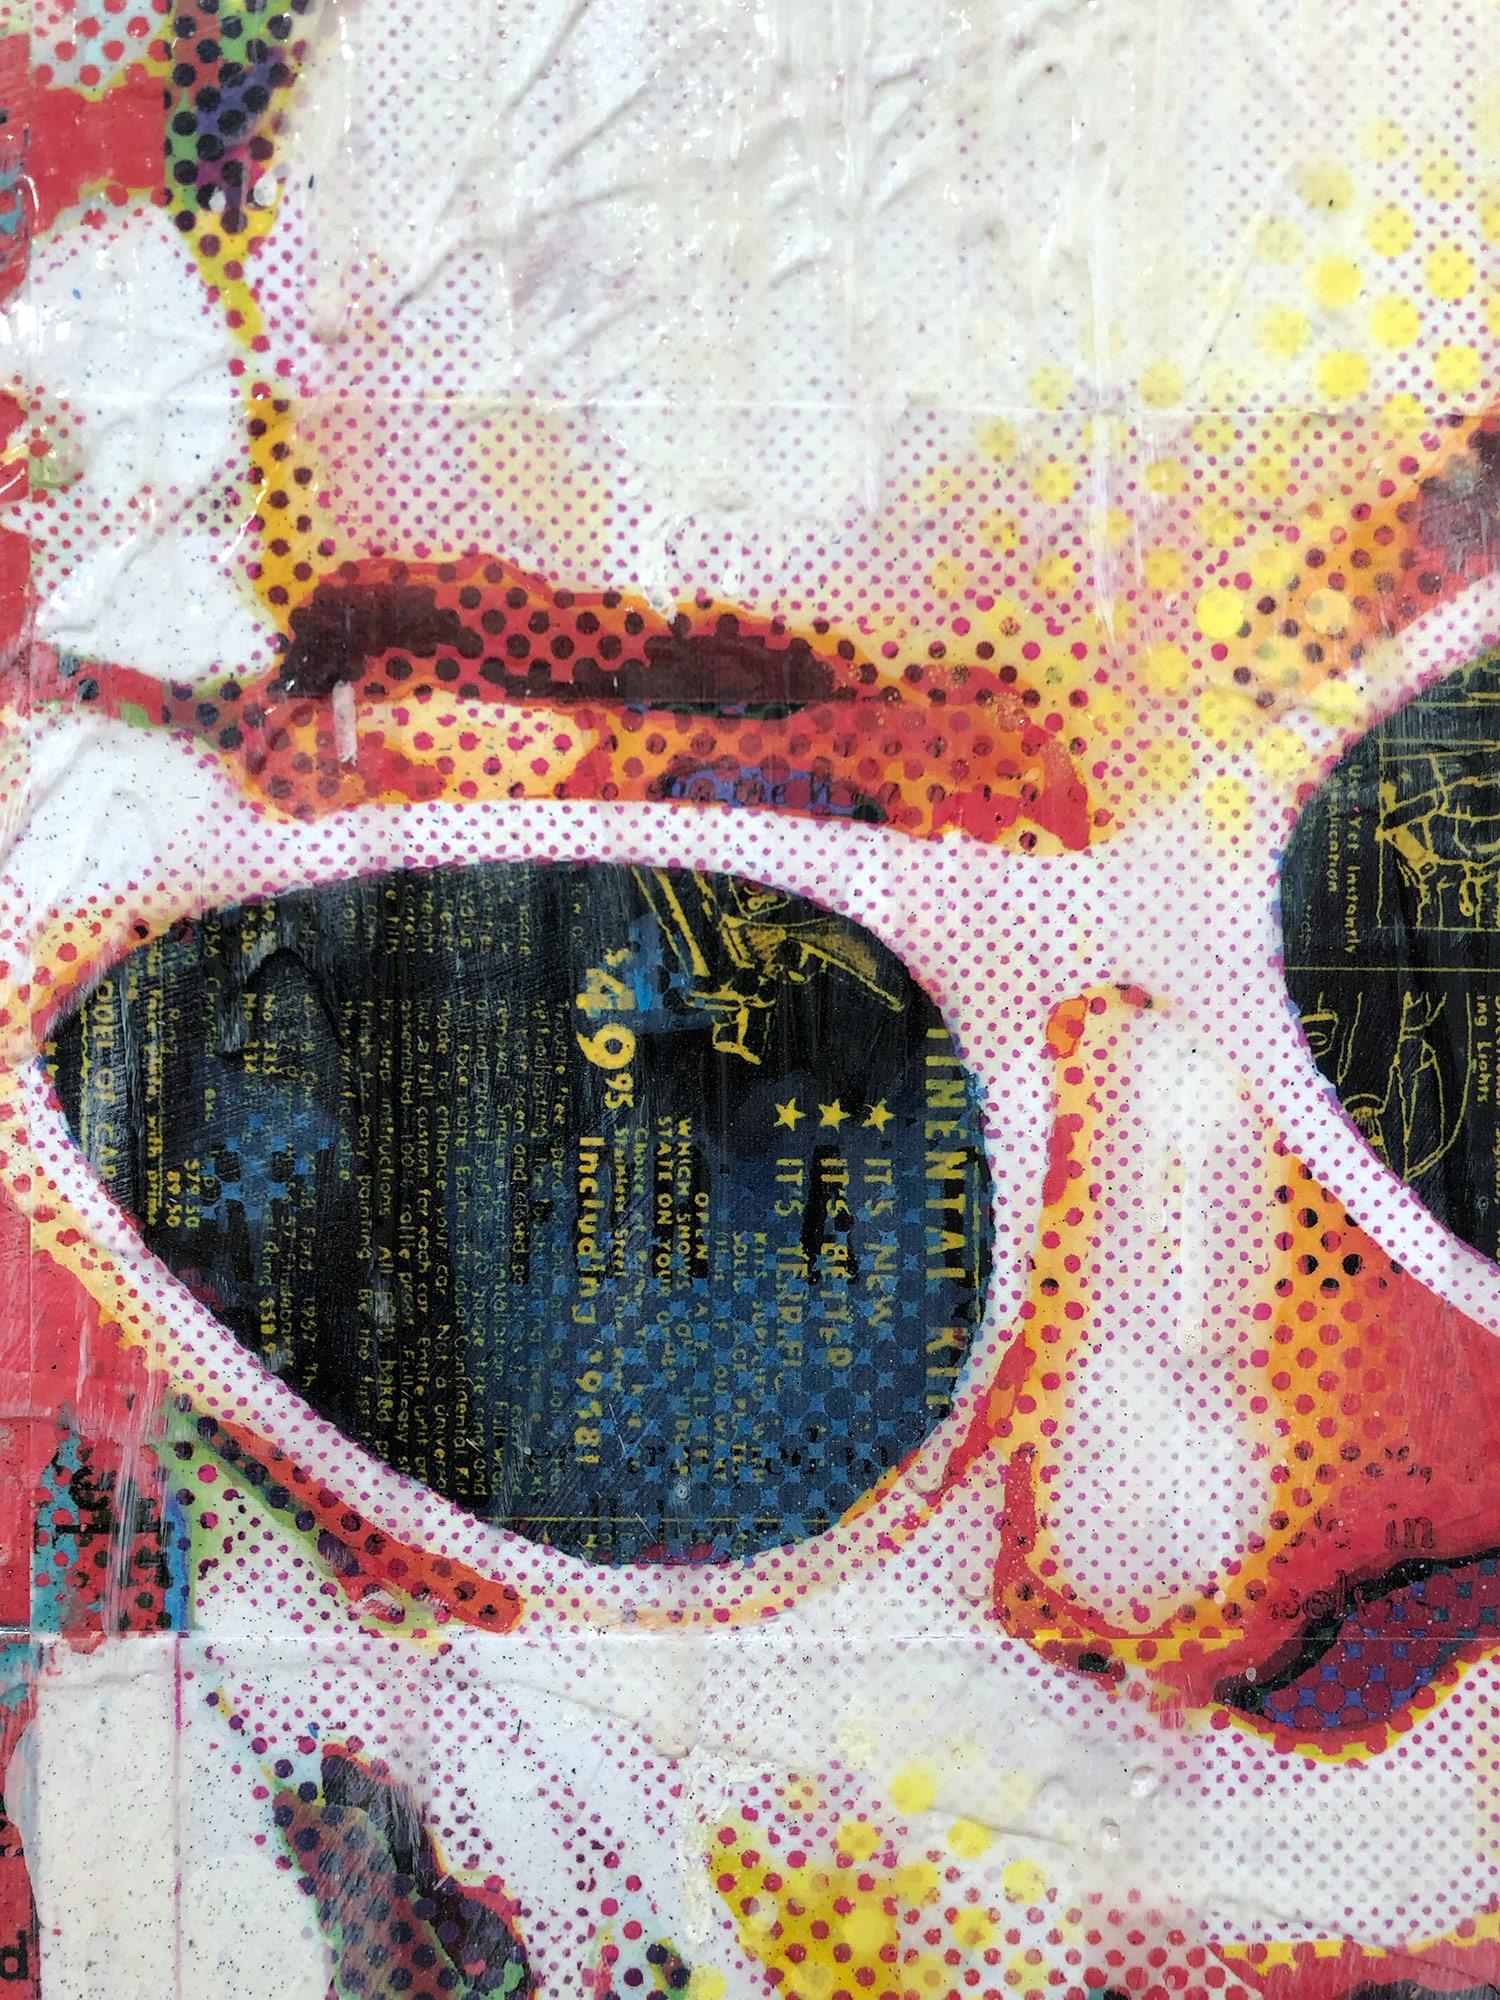 This piece depicts a colorful collage composition portrait of Marilyn Monroe, as Jon Davenport explores the process of deconstructing iconic imagery from the past and present. Davenport start’s out with photos of his paint-stained studio floor and